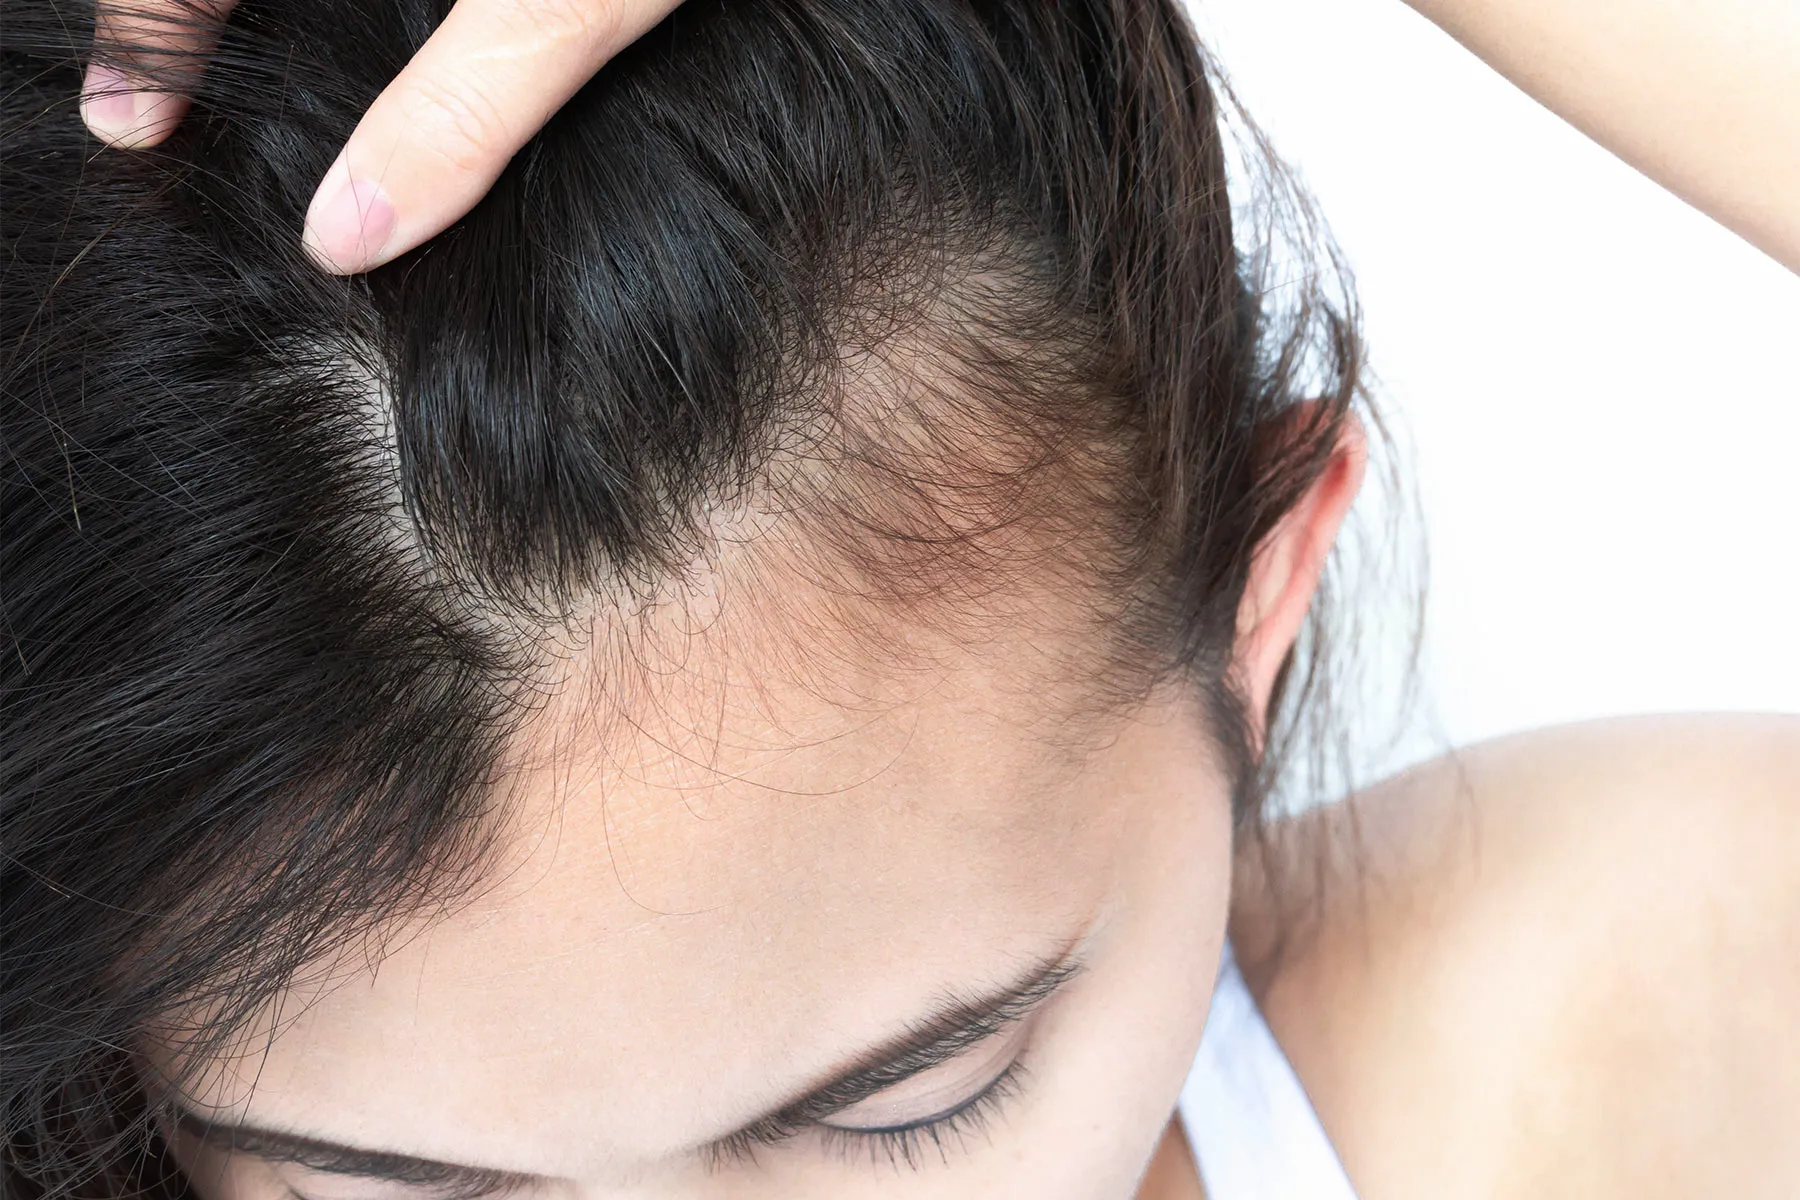 Hair Regrowth Stimulated by Microneedle Patch